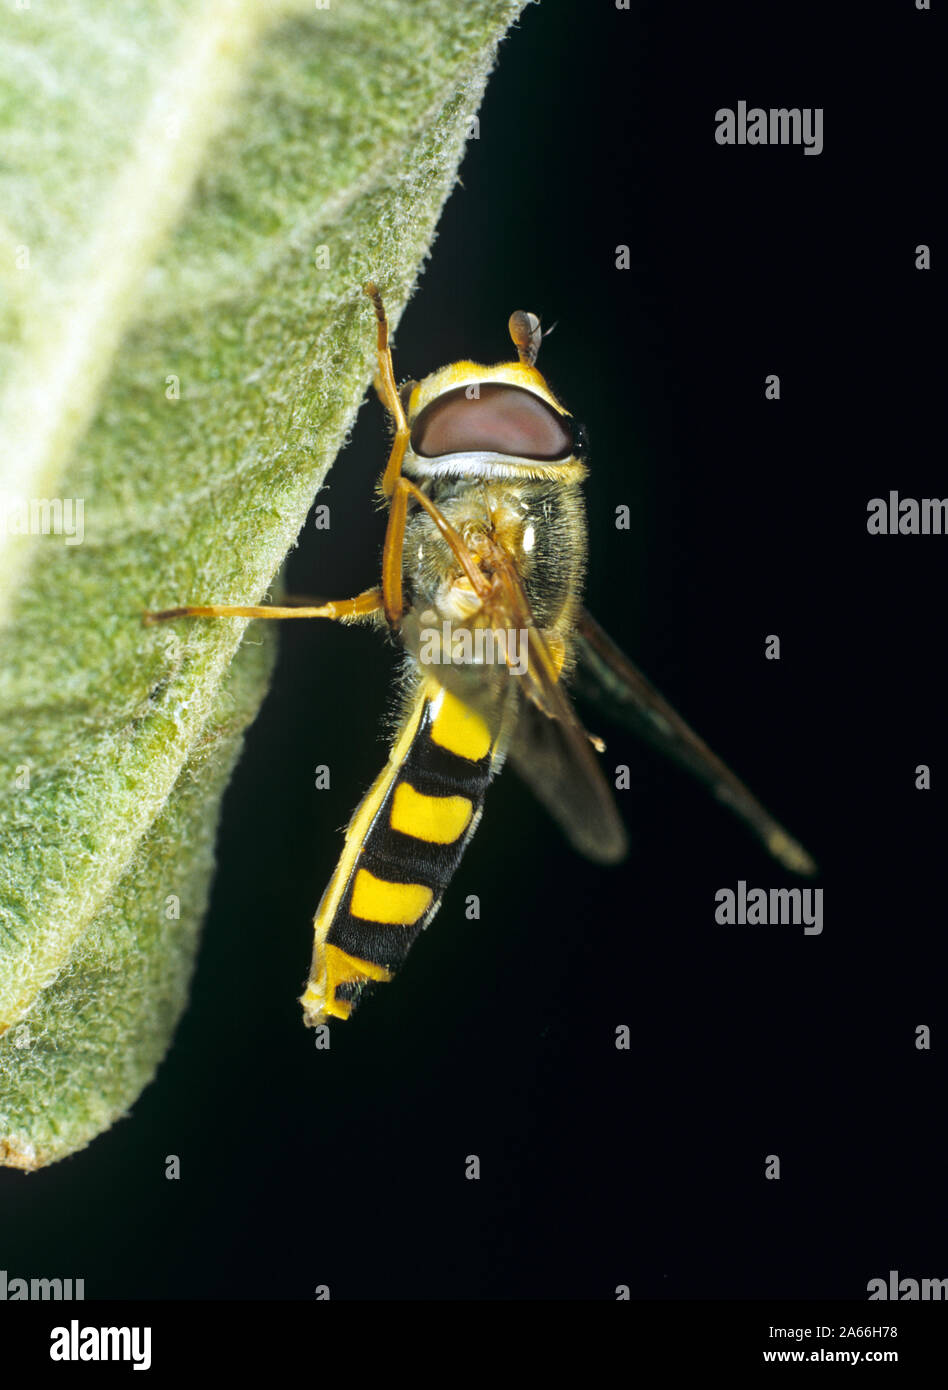 A hoverfly (Syrphus ribesii) yellow and black banded adult female. Larvae are important natural insect predators Stock Photo